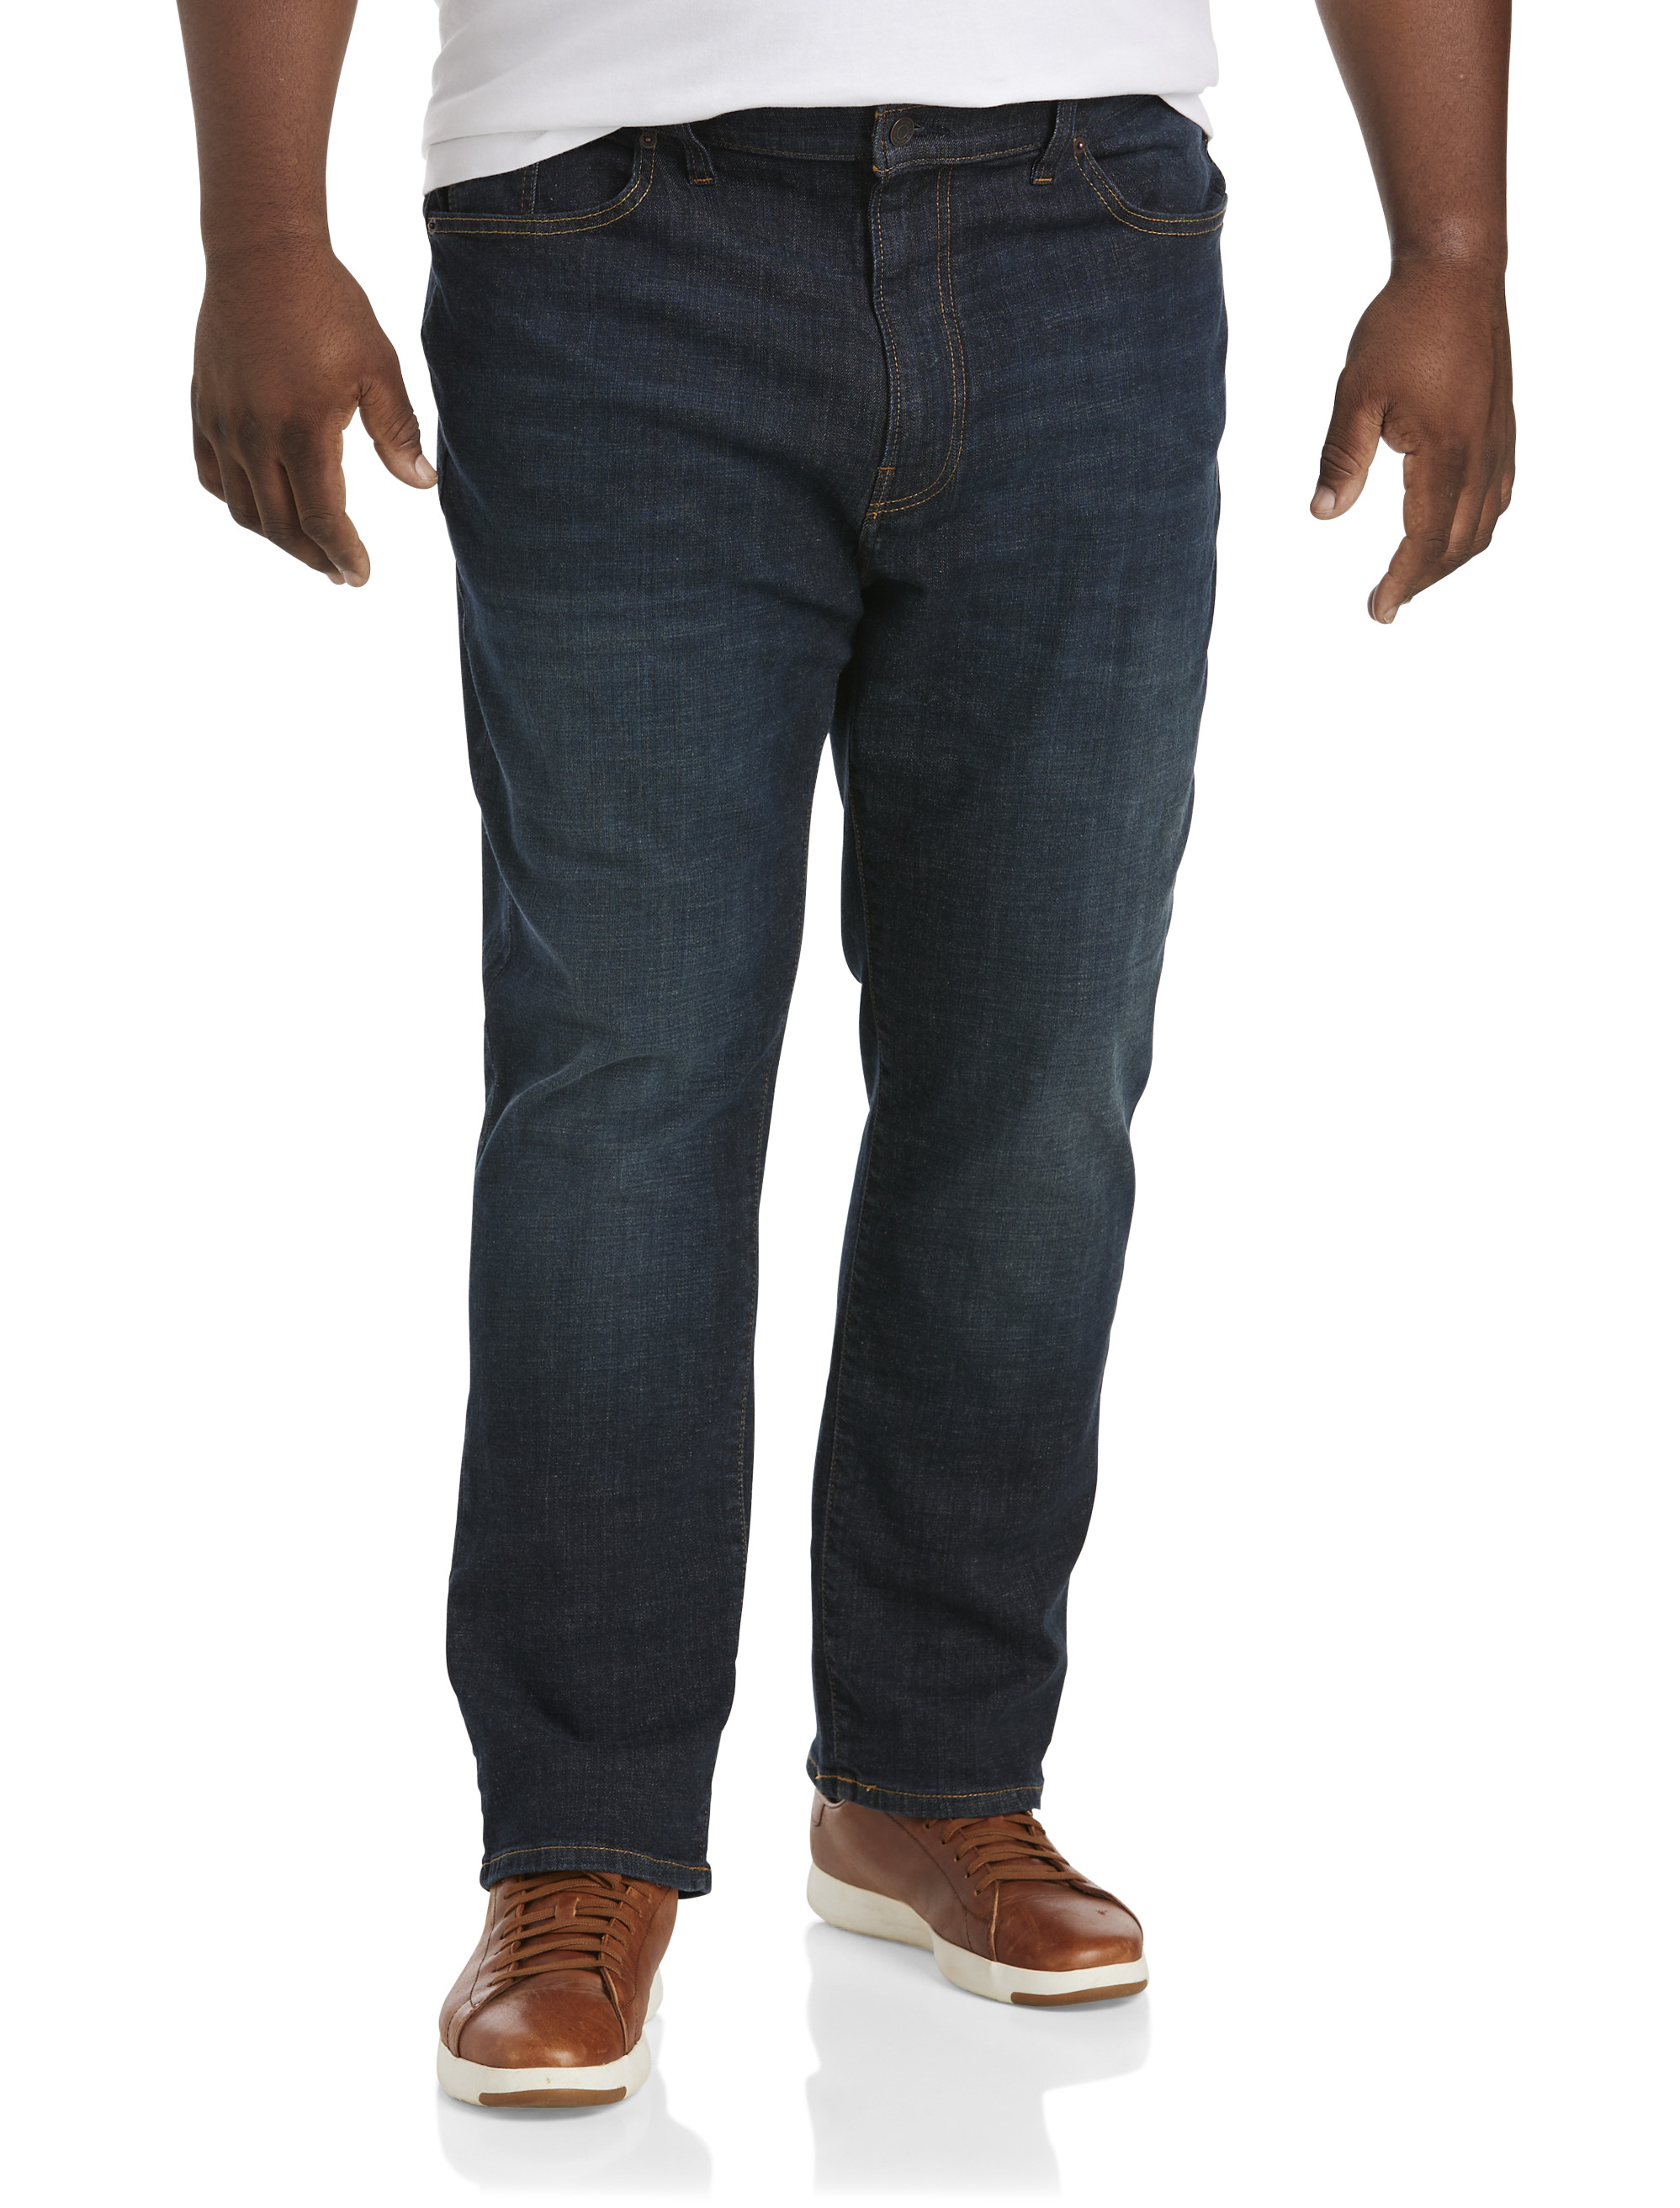 Indigowood Athletic-Fit Stretch Jeans